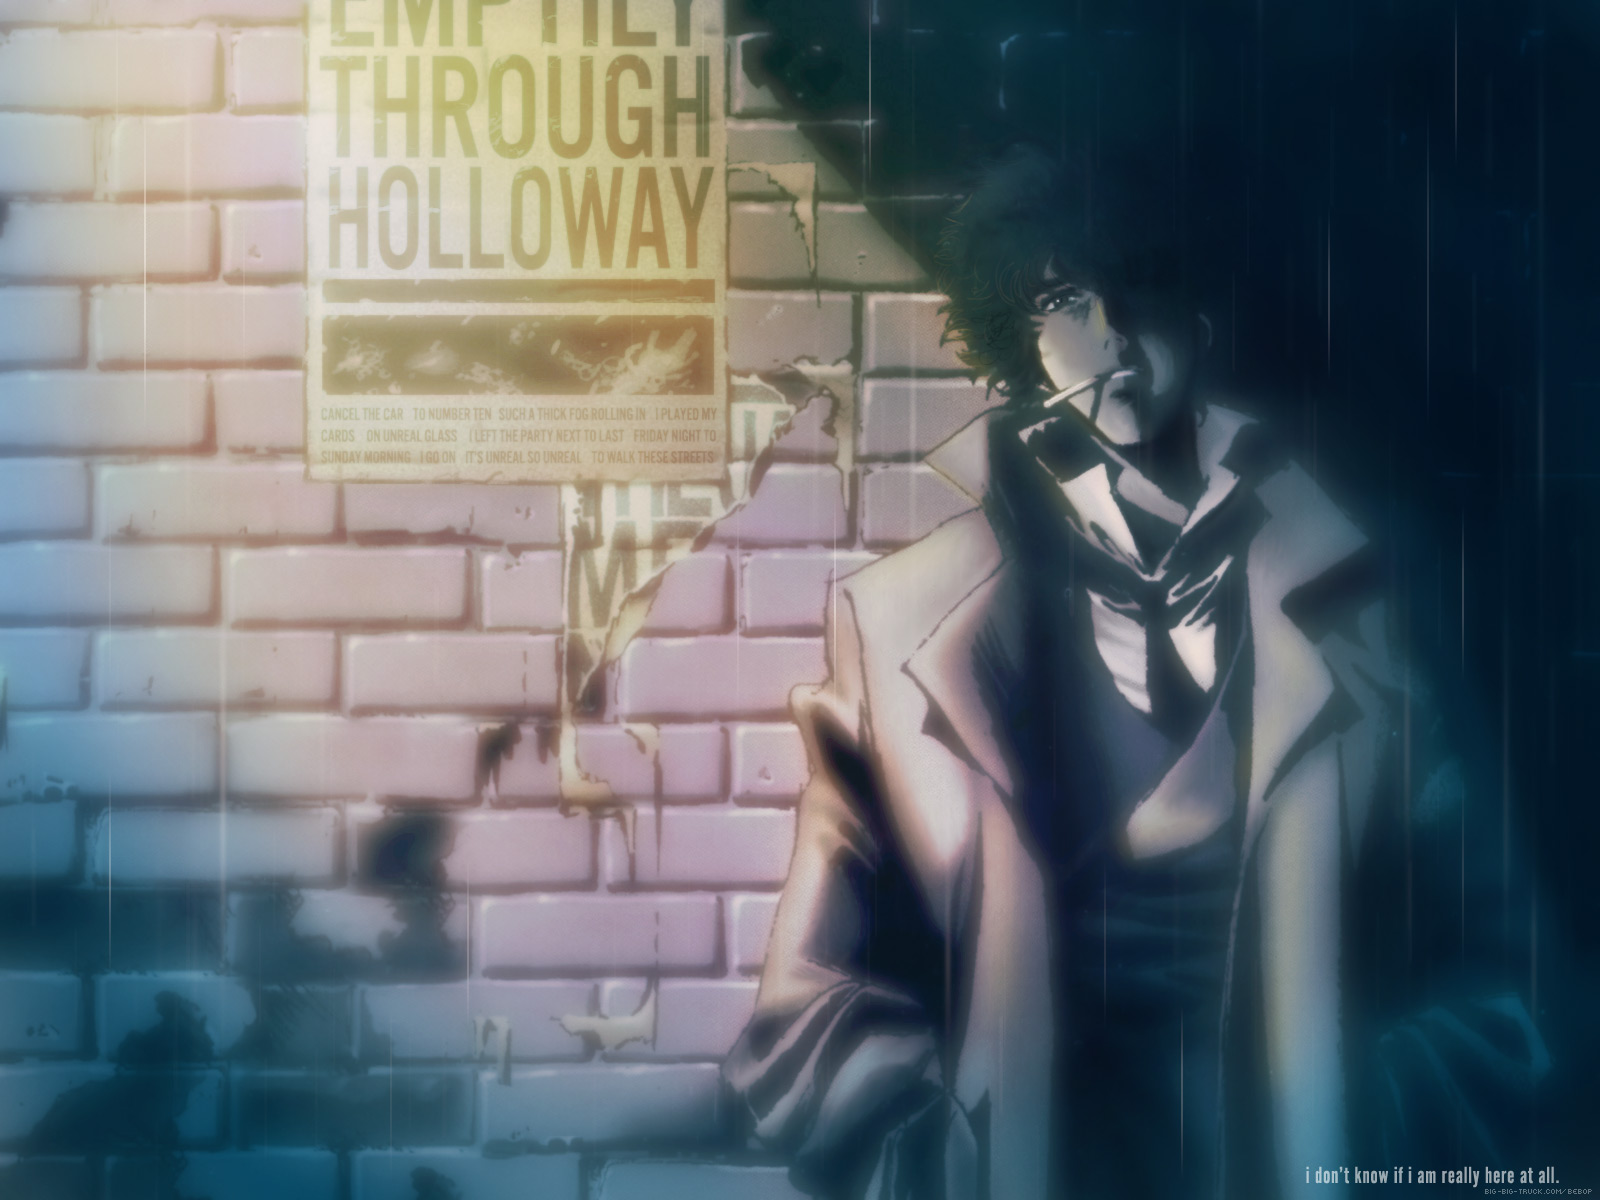 Spike Spiegel, the protagonist from the Anime series Cowboy Bebop, in a dynamic pose.